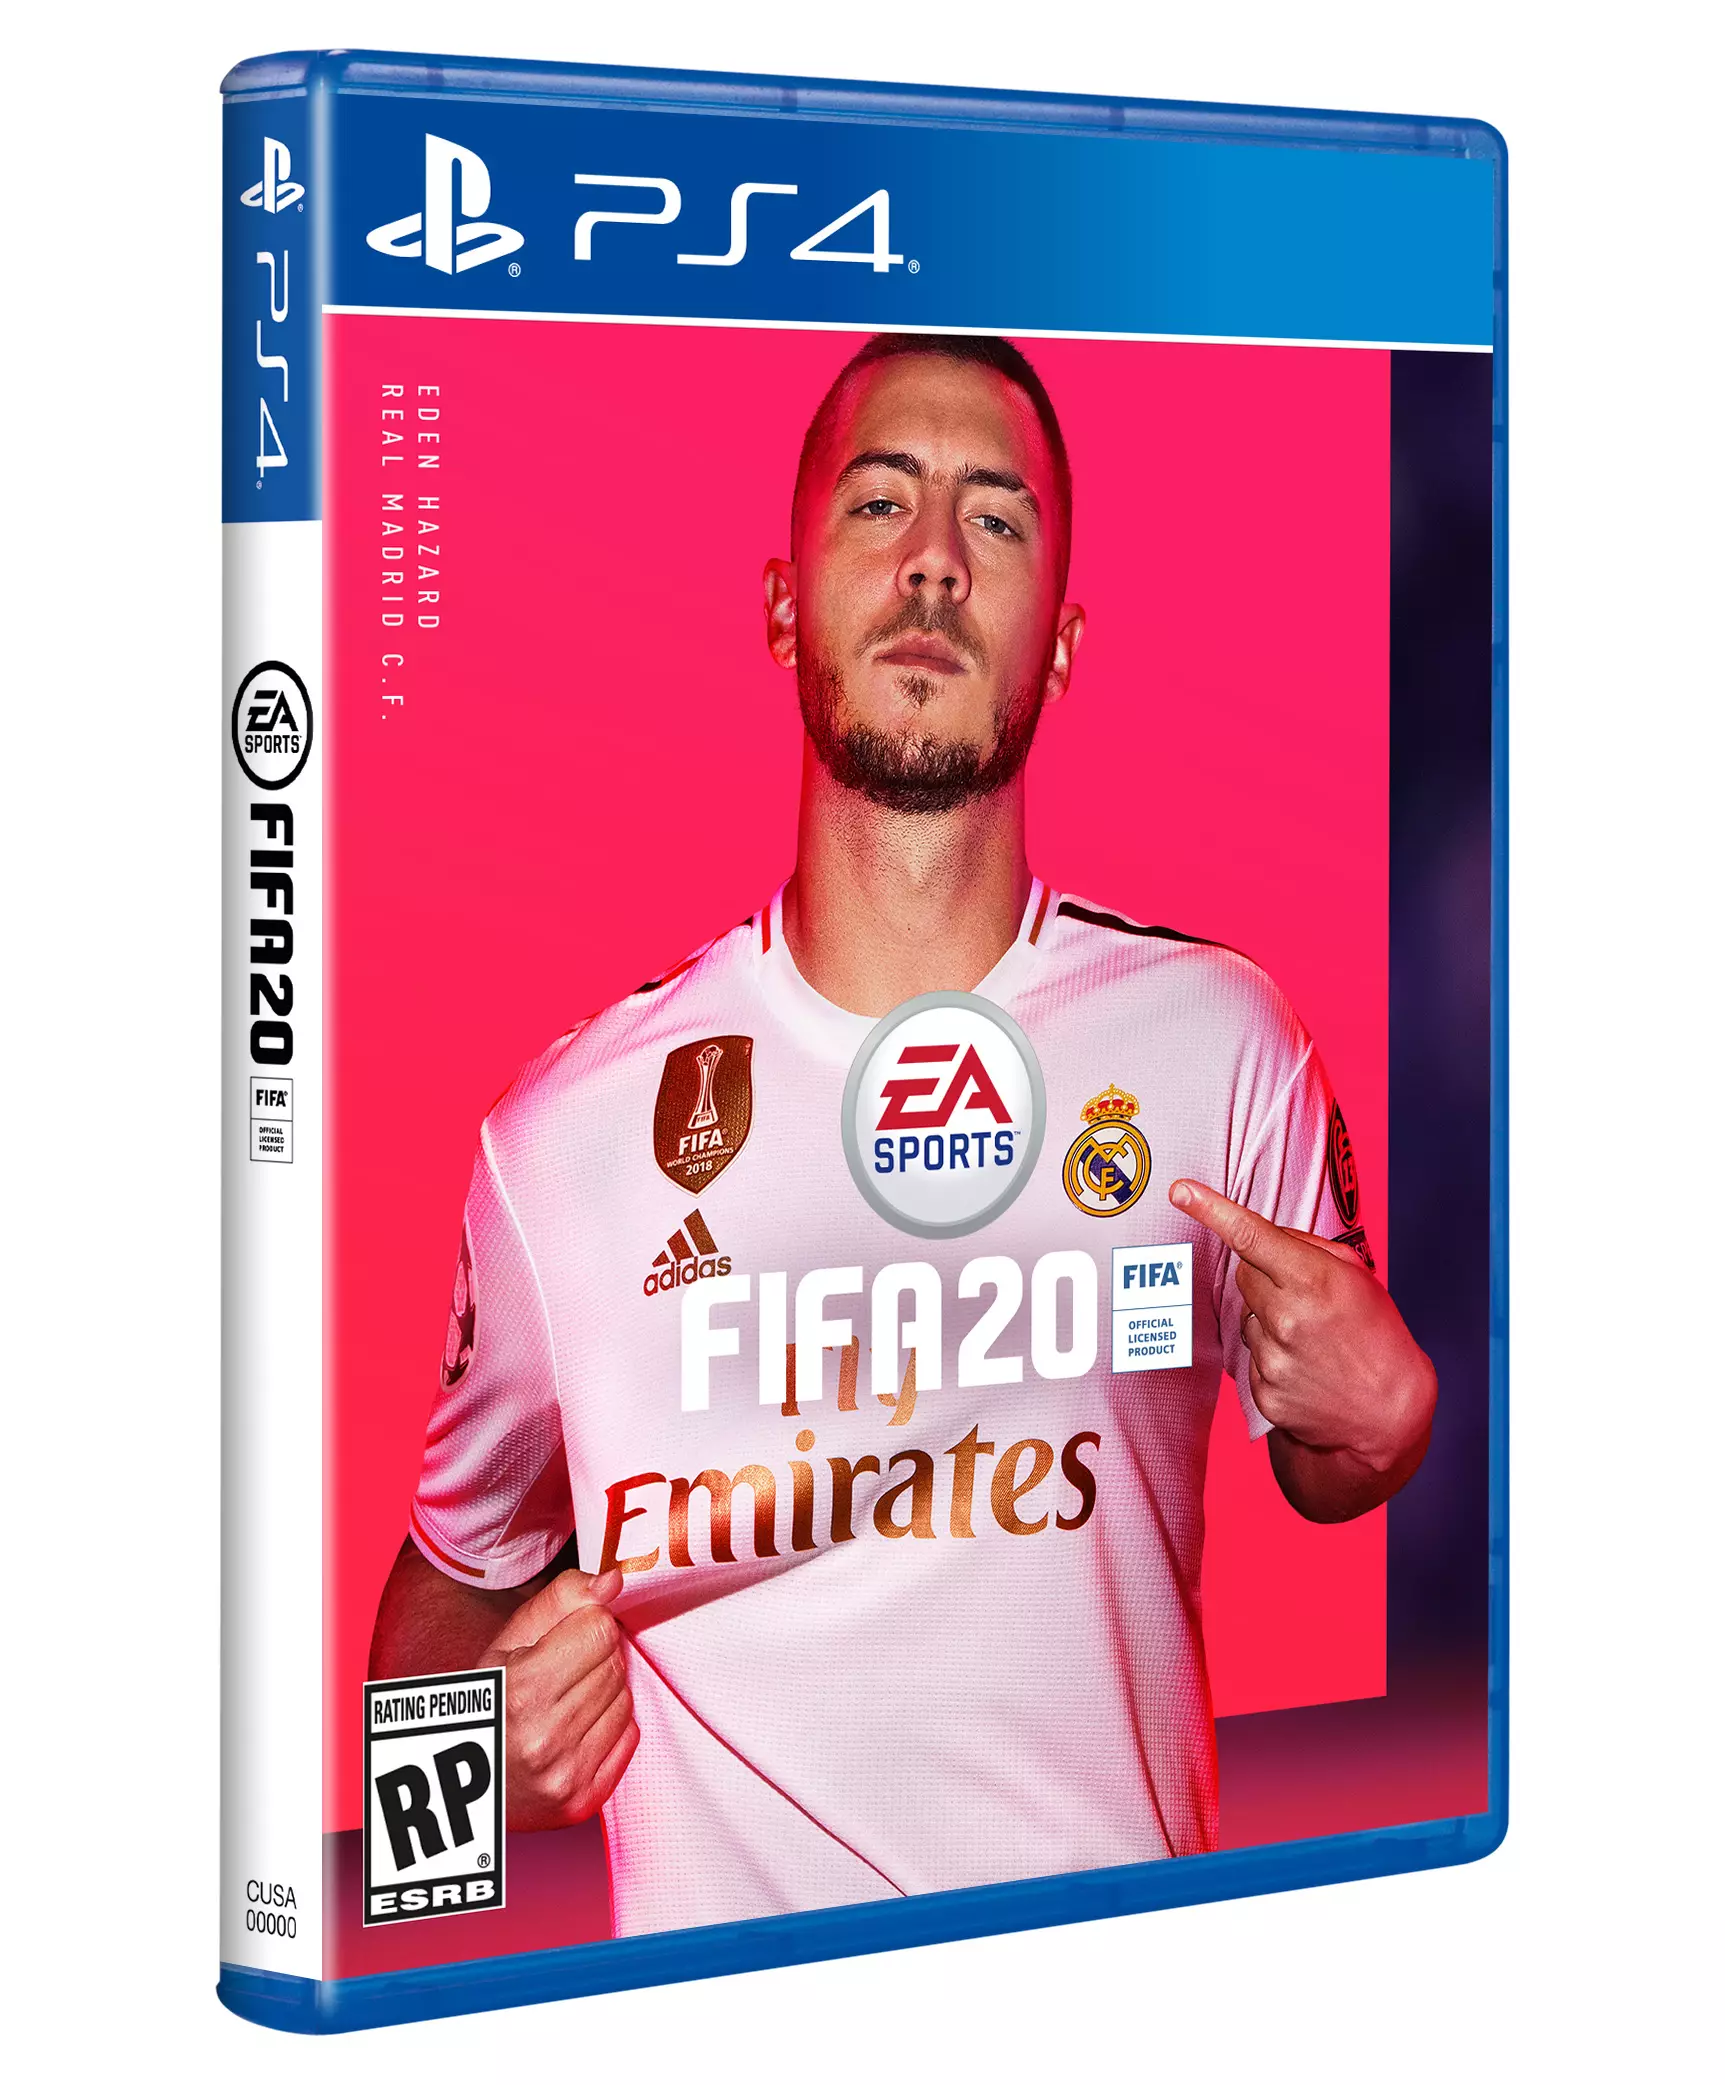 New Real Madrid signing Eden Hazard will feature on the standard edition